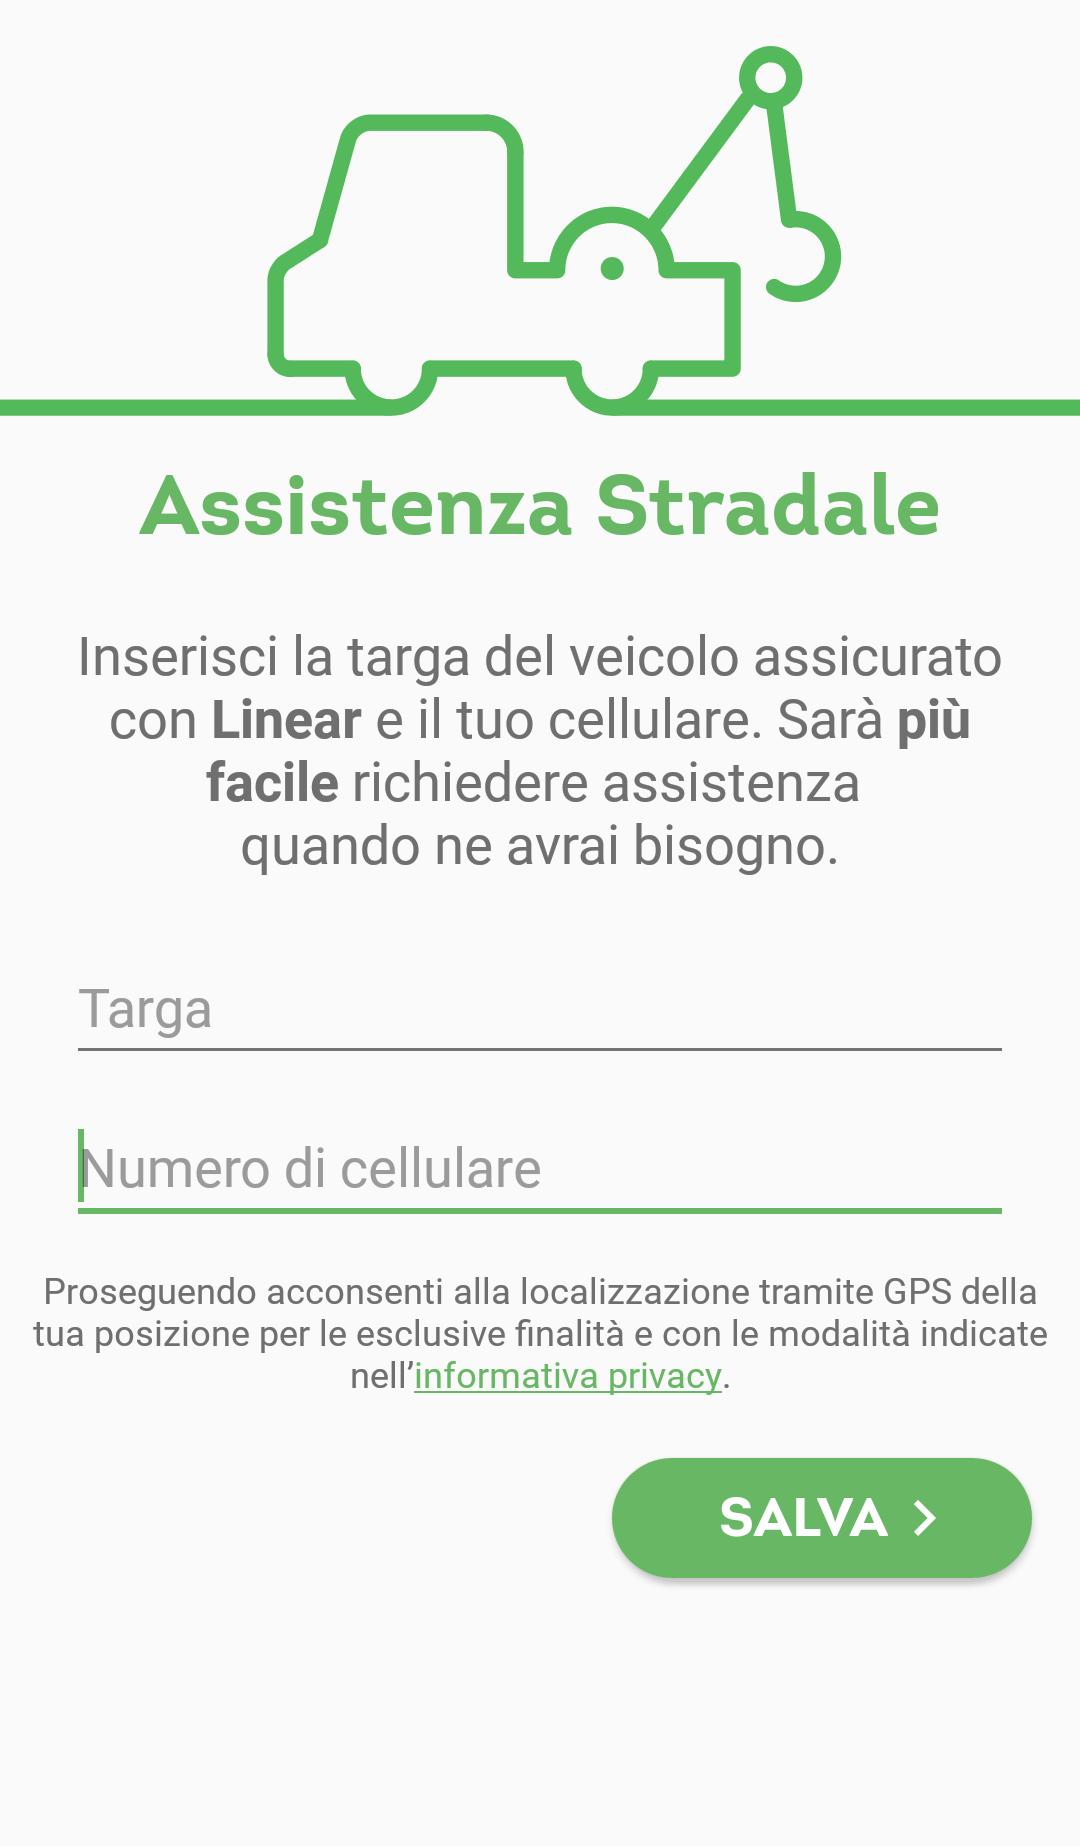 Linear Assistenza stradale for Android - APK Download